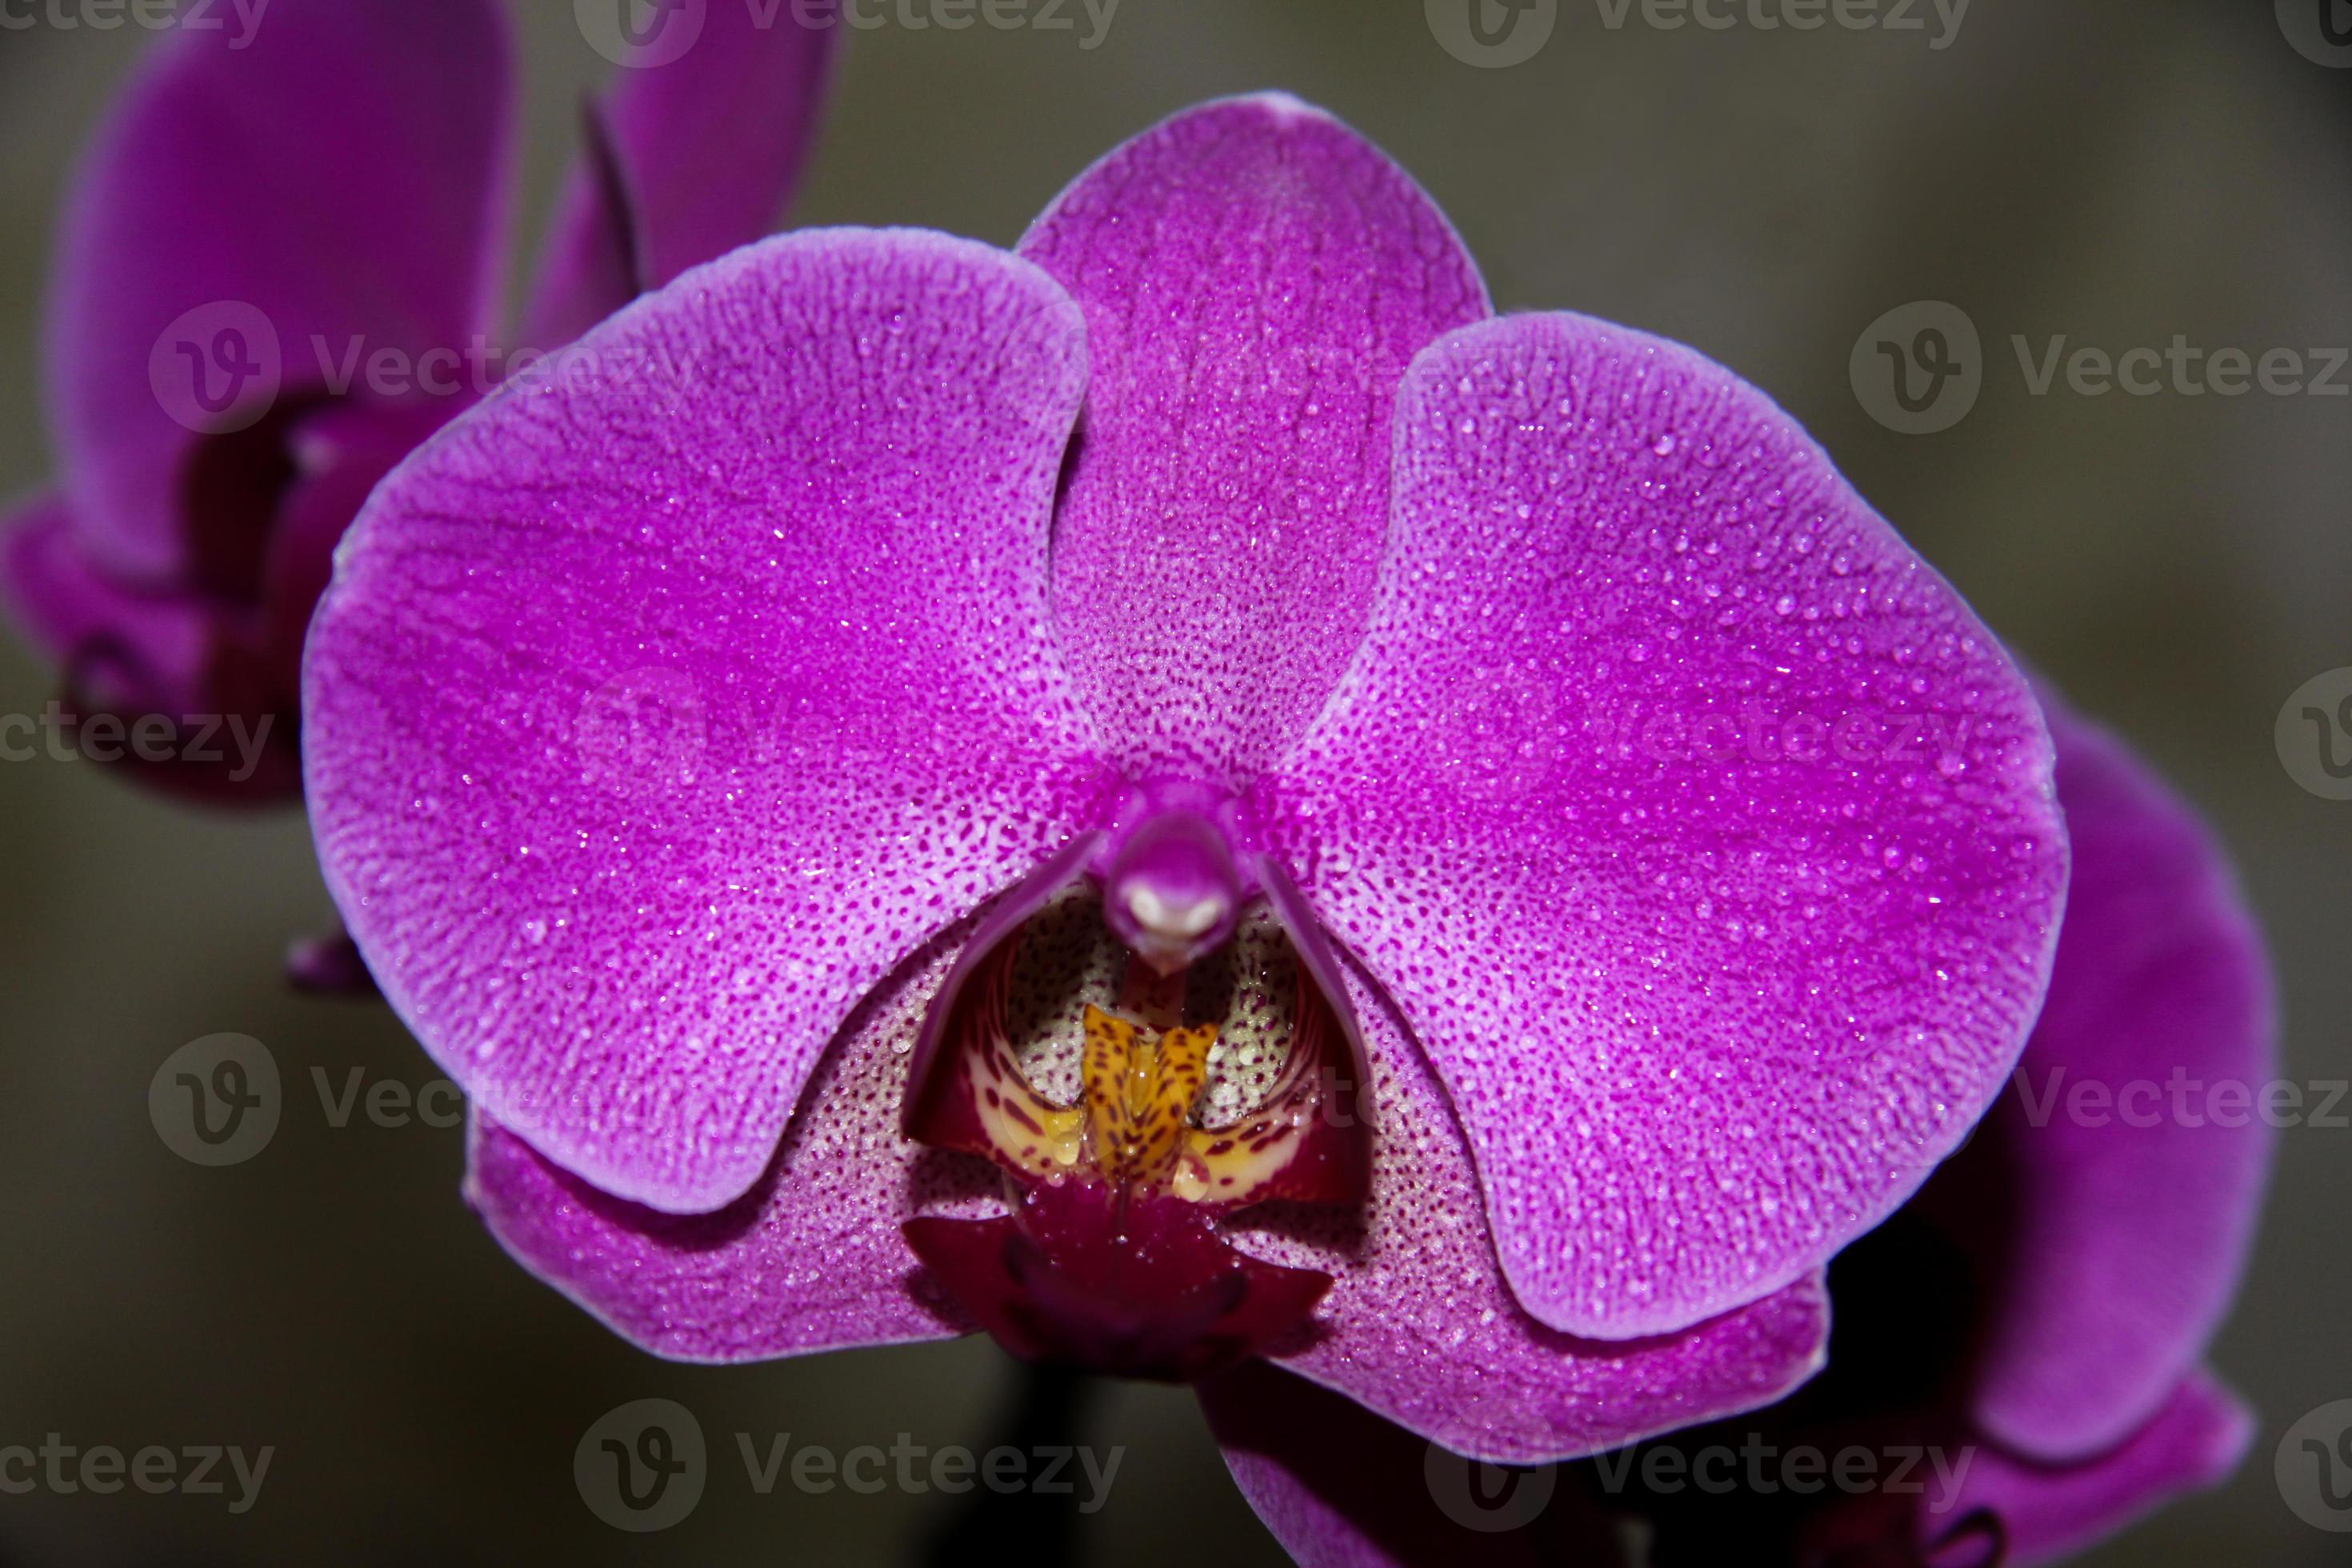 Purple phalaenopsis orchid flower, phalaenopsis Purple phalaenopsis flowers  on the right. it is known as butterfly orchid. Selective focus. 12828658  Stock Photo at Vecteezy